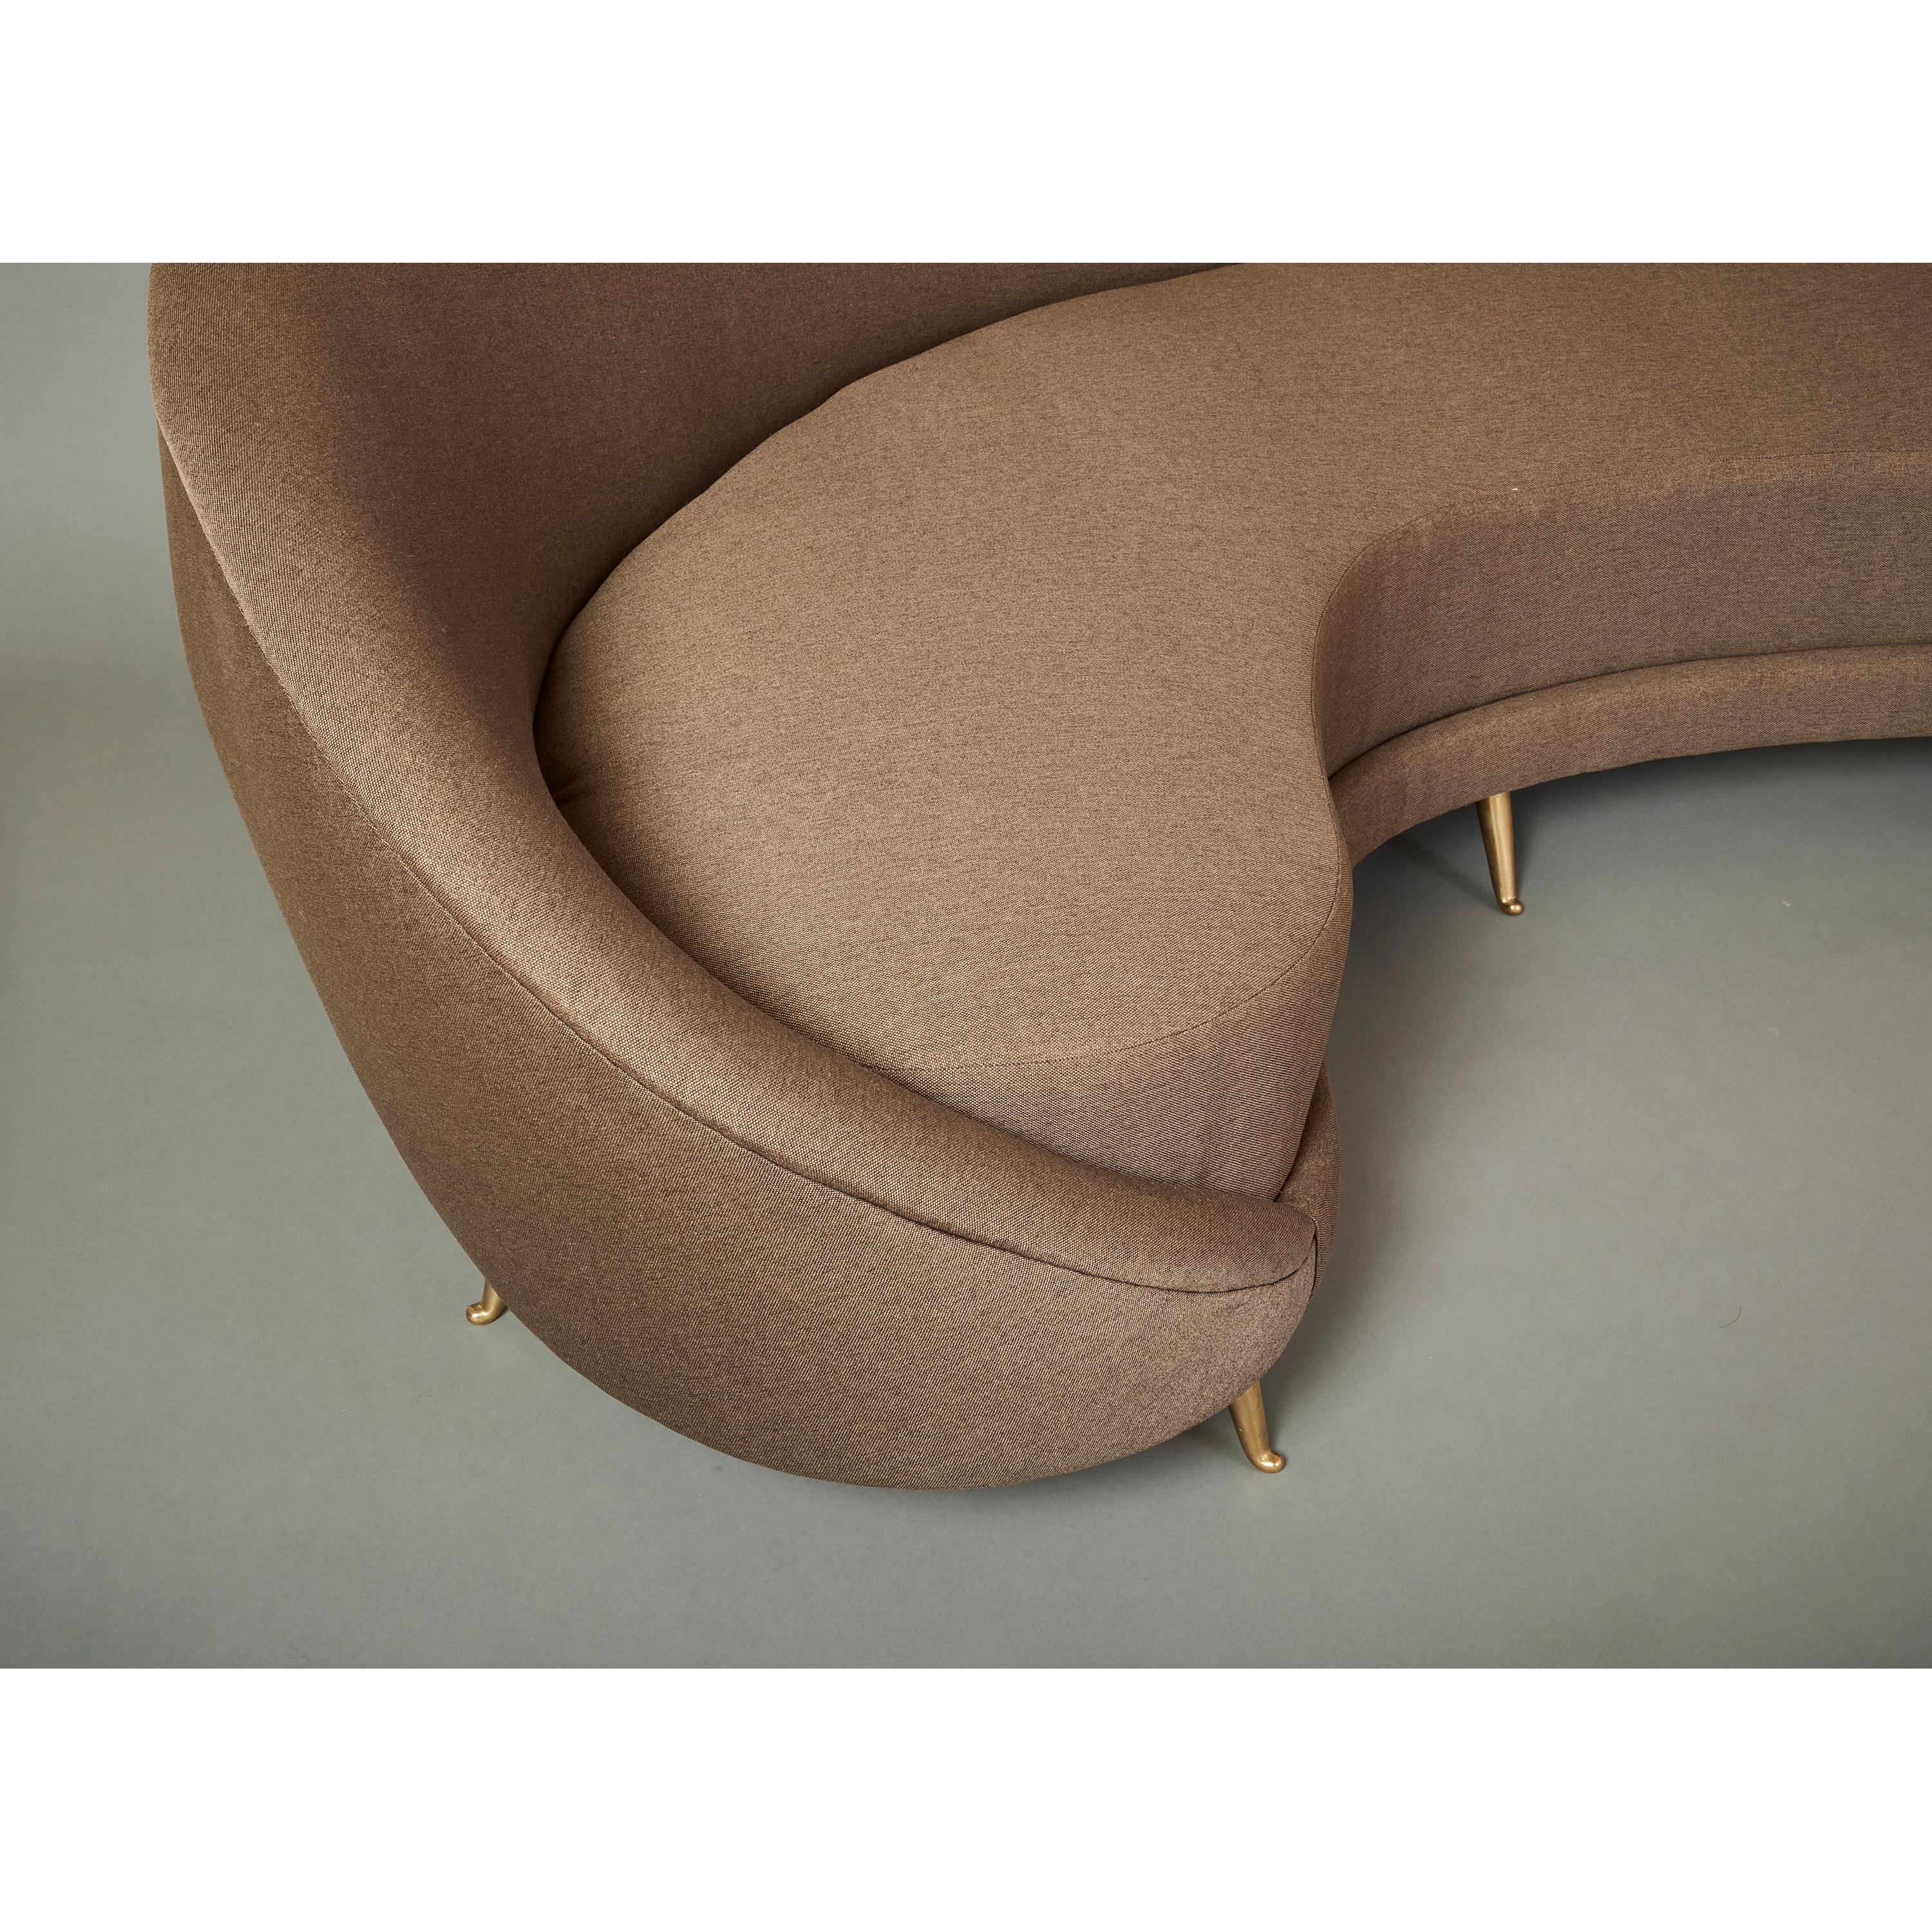 Federico Munari Curved Boomerang Sofa with Polished Brass Legs, Italy 1950's For Sale 9